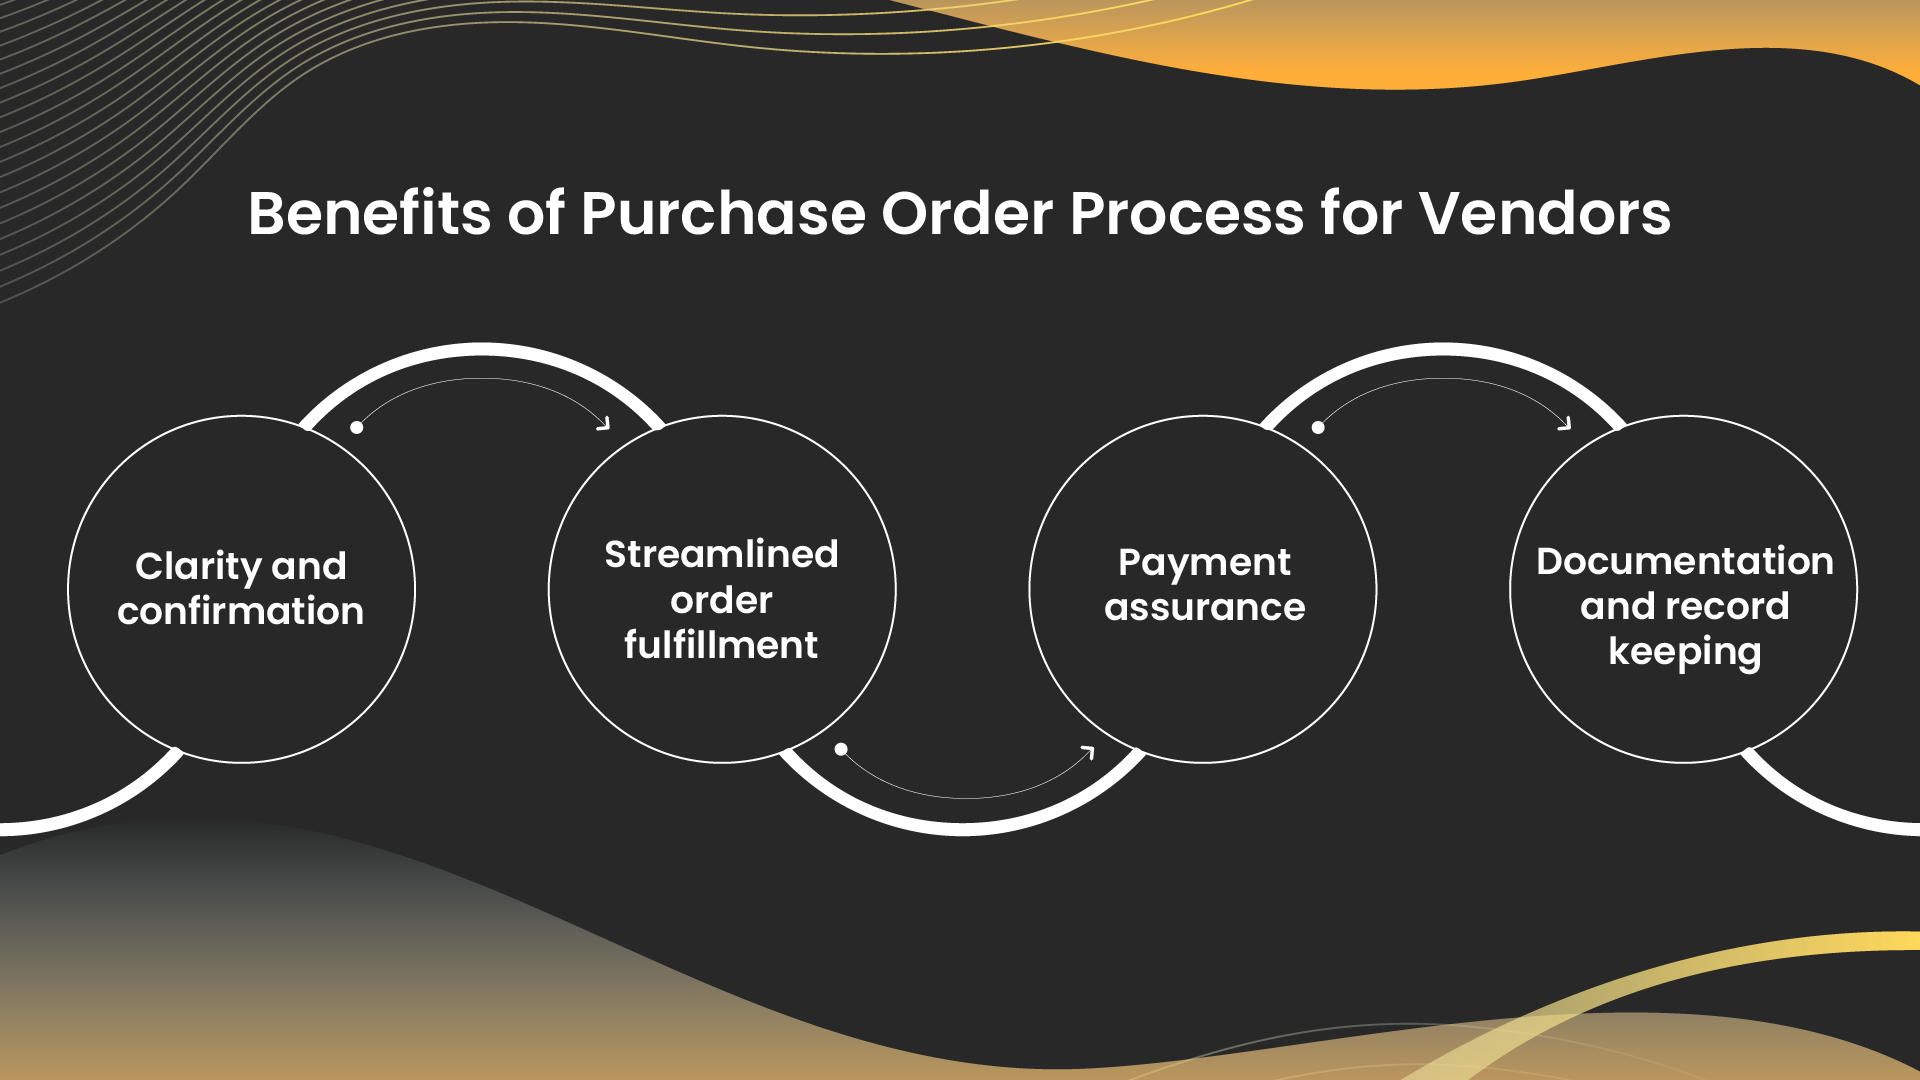 Benefits of Purchase Order Process for Vendors